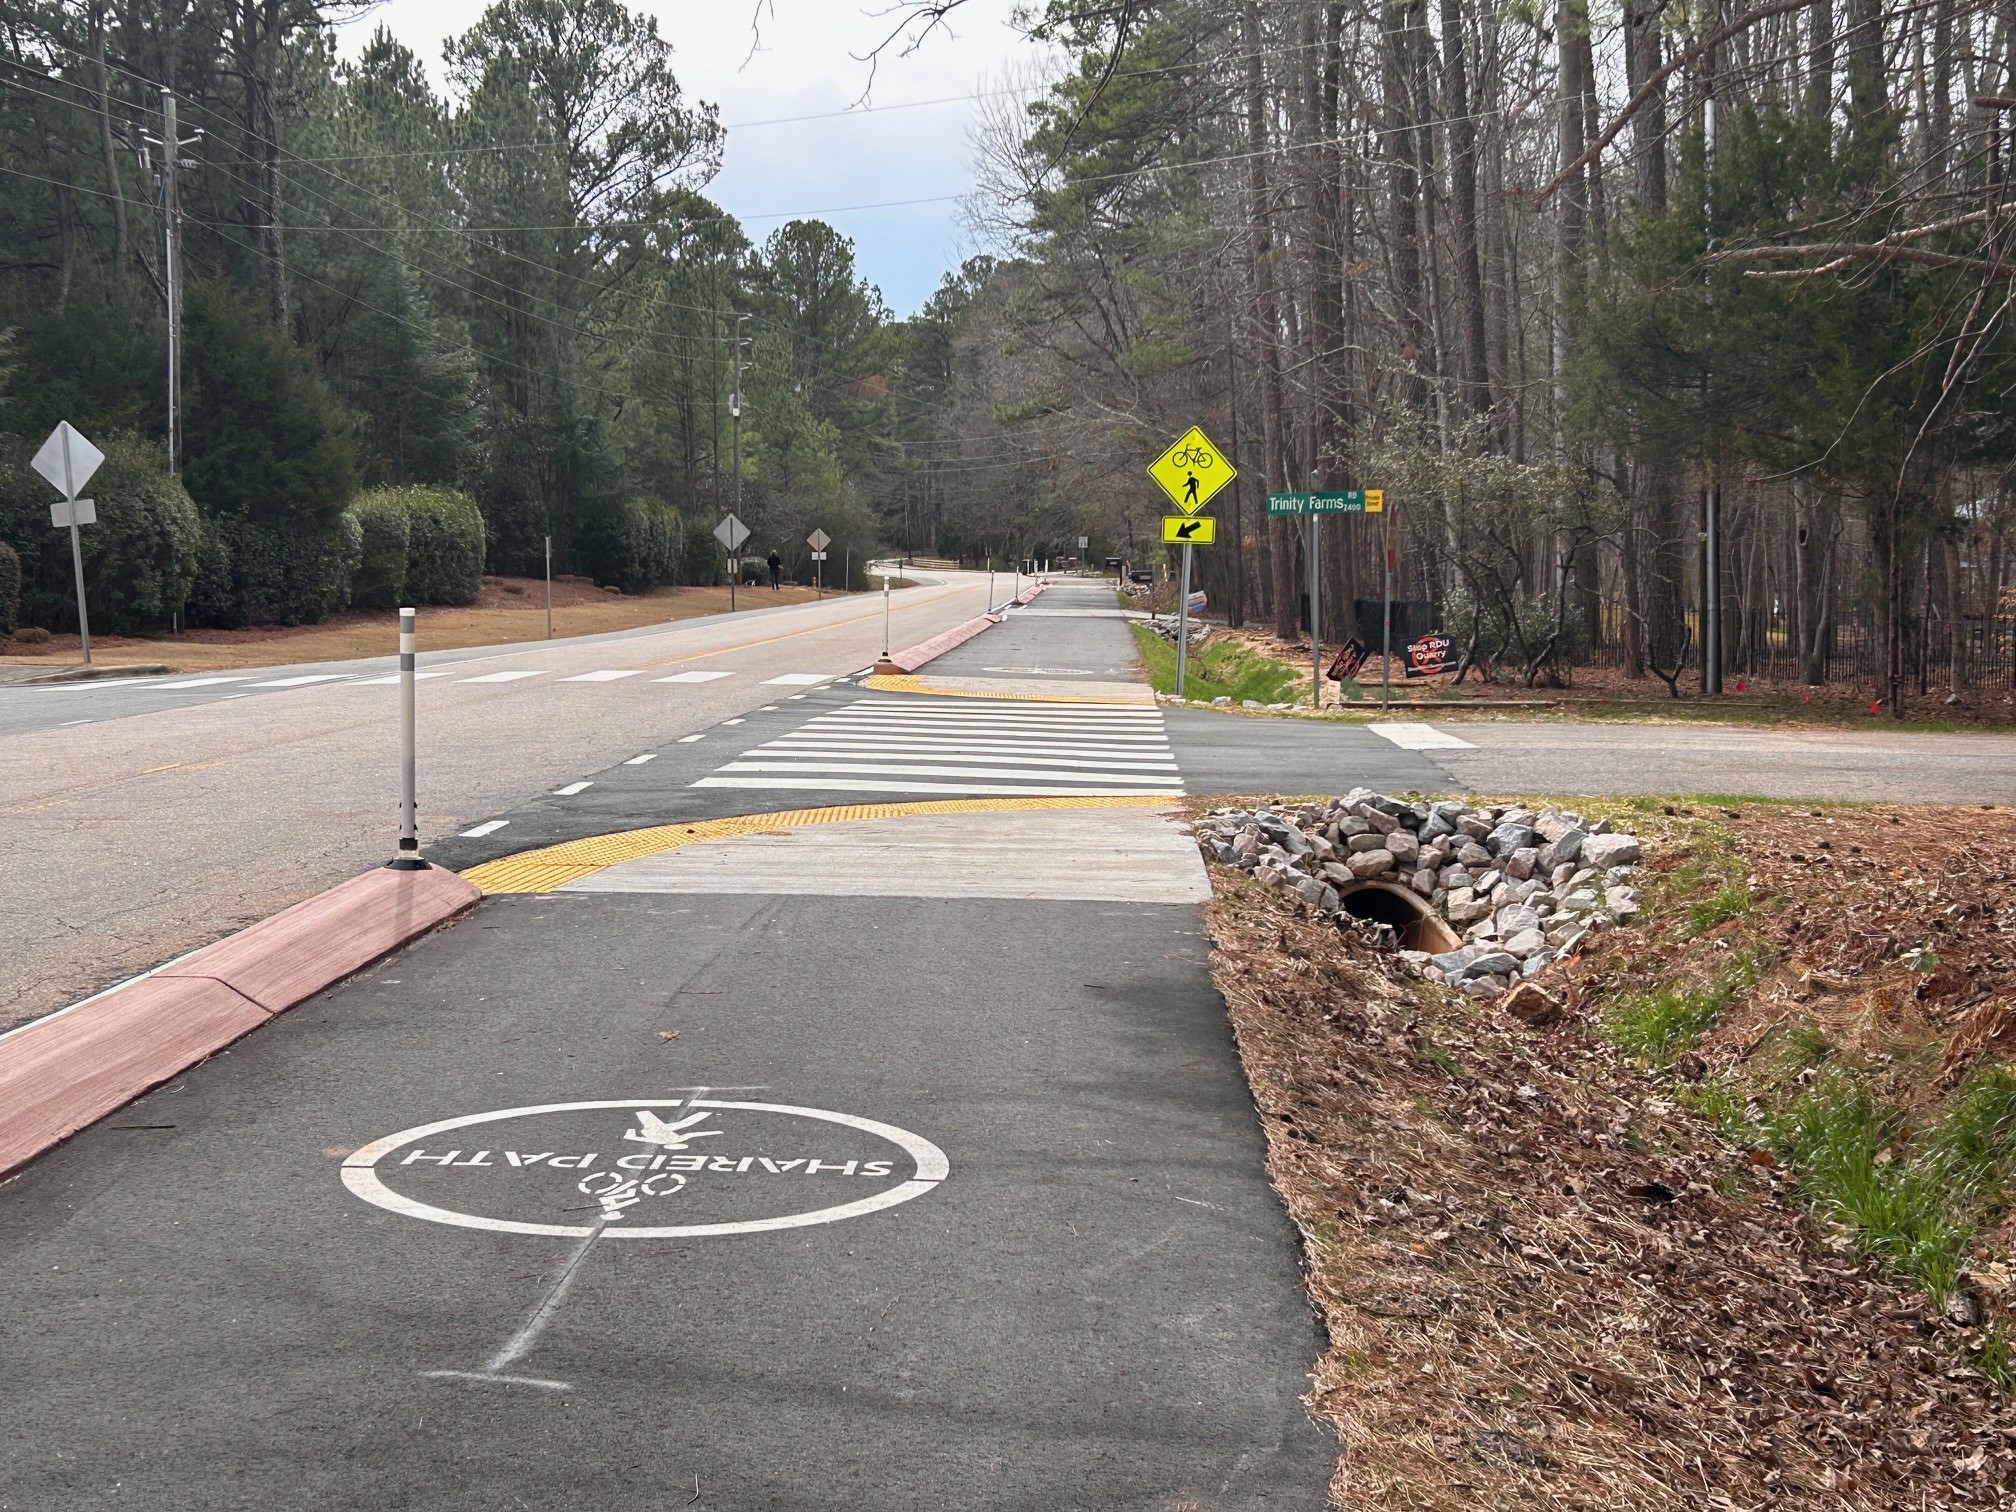 The new multi-use path on Trenton Road. This image is at an intersection and shows the message "share this path".